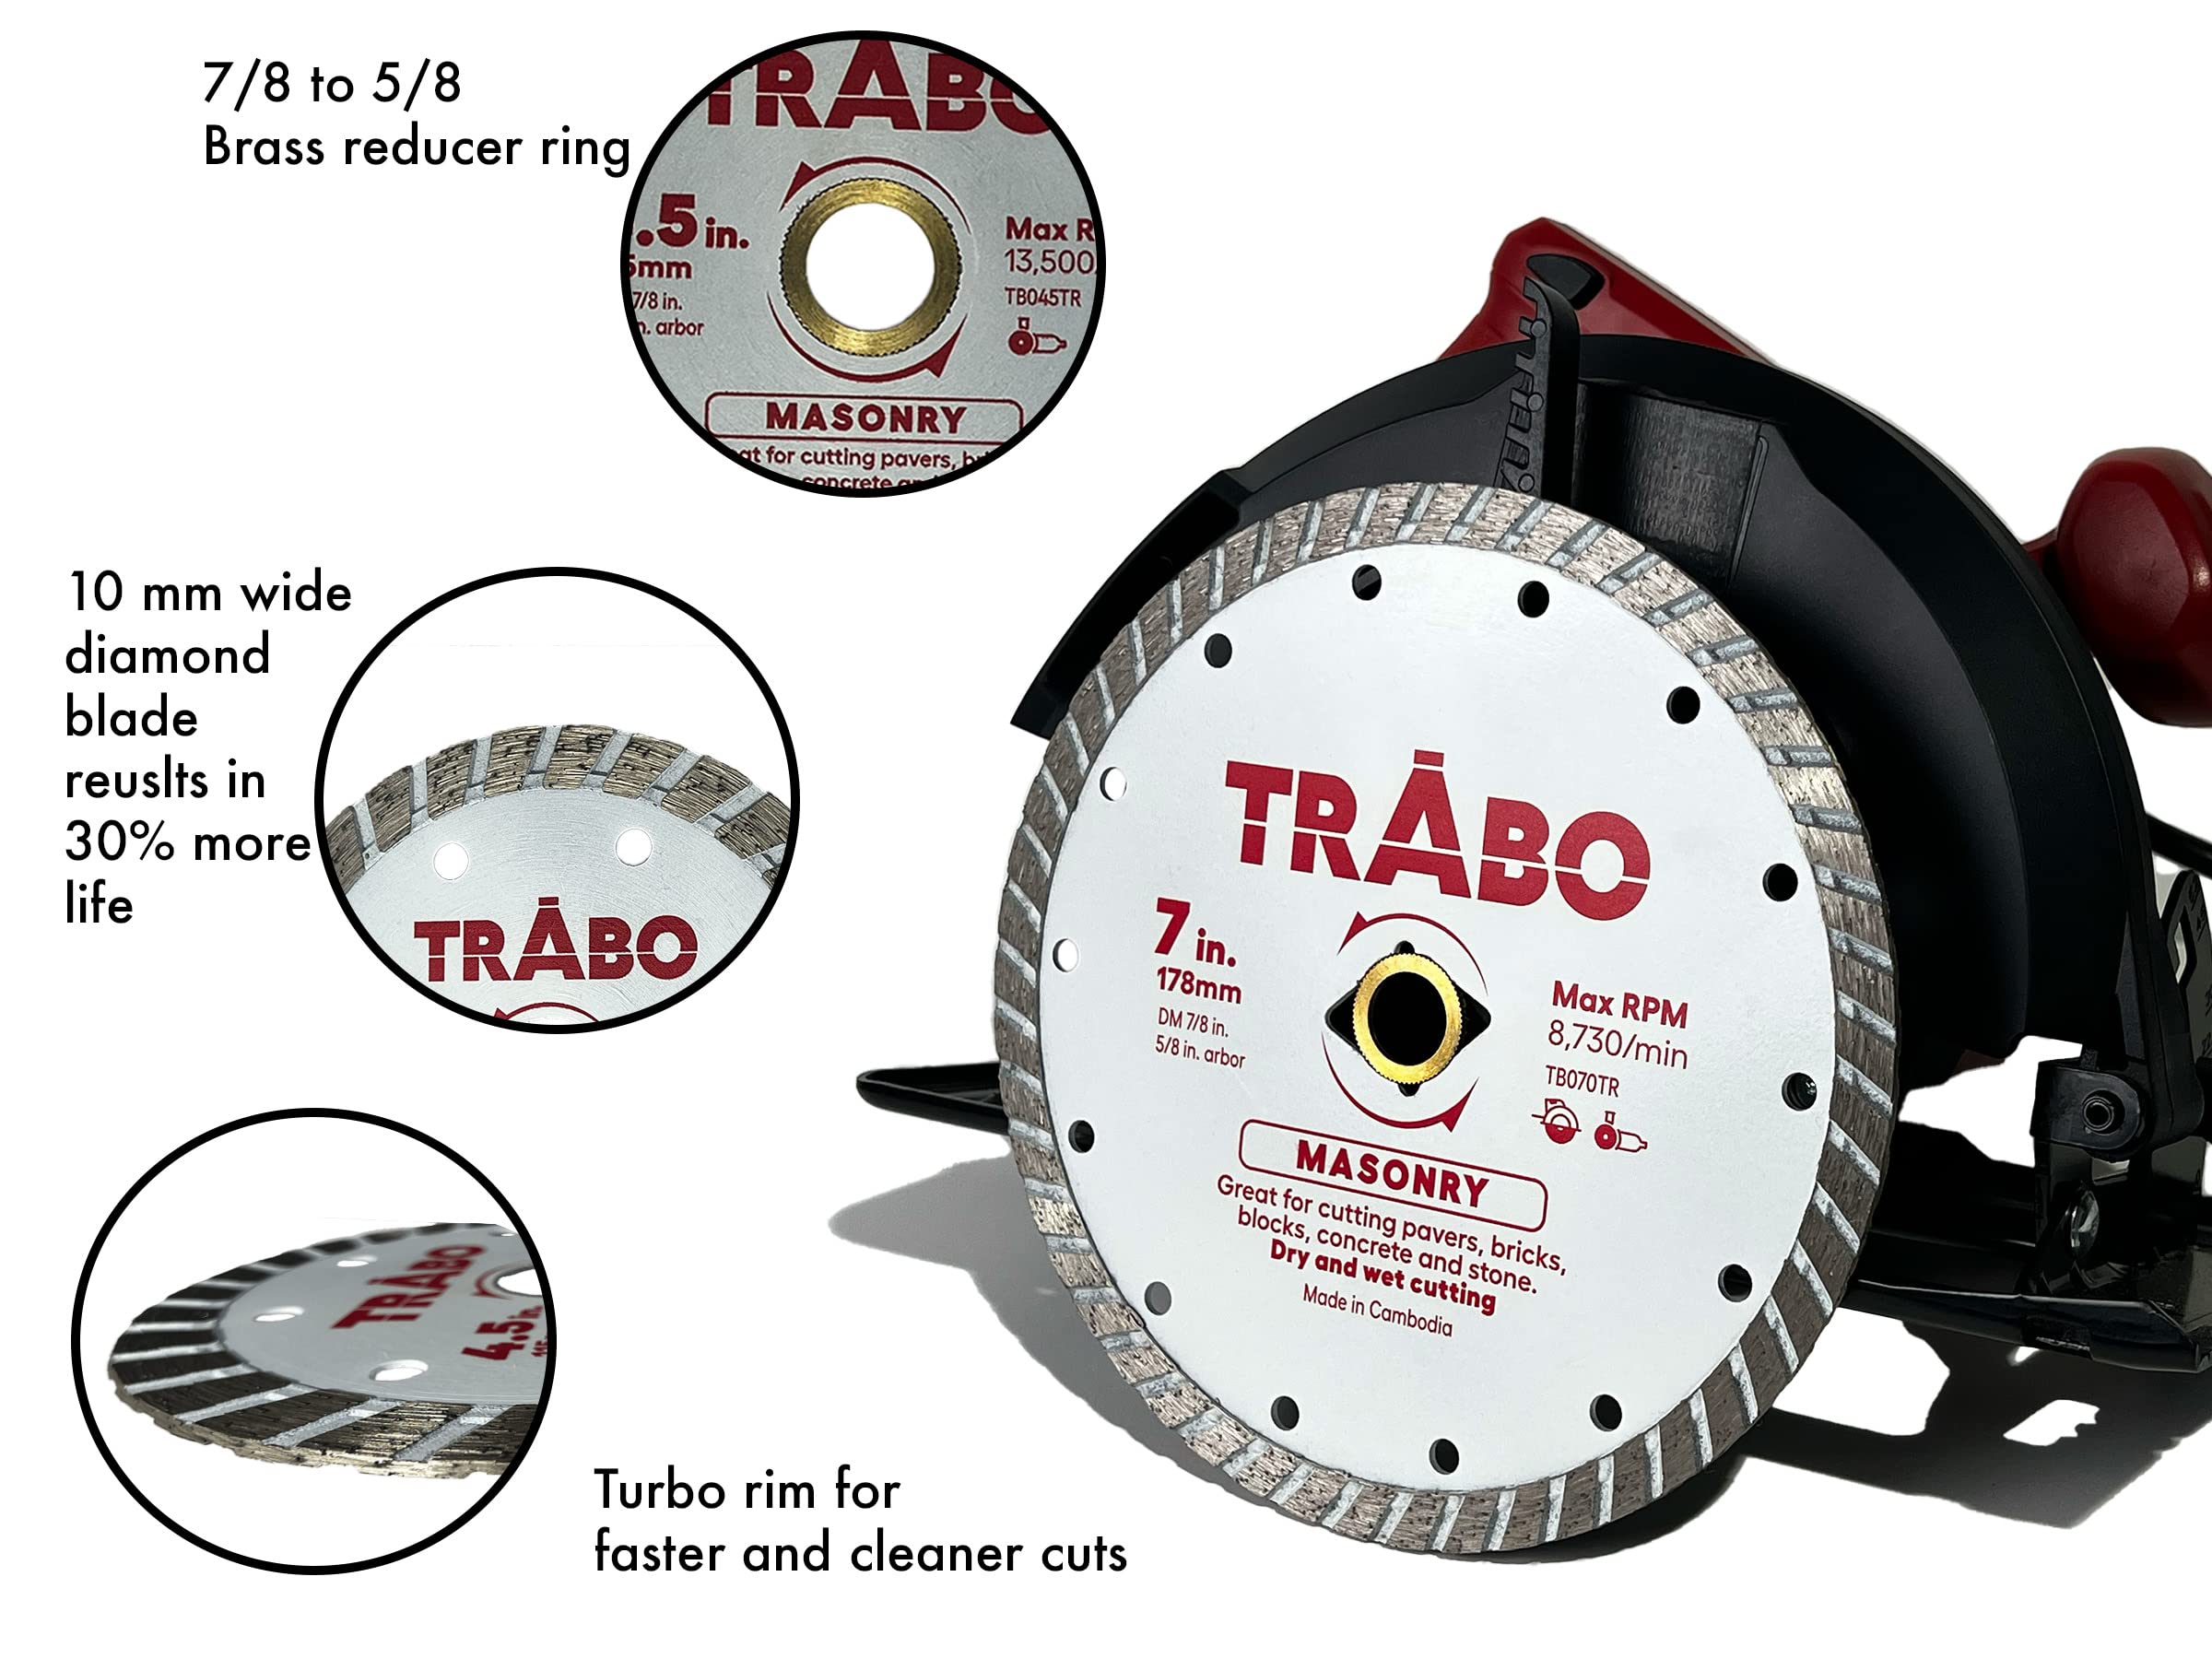 Trabo 7 Inch Masonry Turbo Rim Diamond Metal Bond Blade for Cutting Cement, Pavers, Concrete with Rebar, Natural Stone and More, with 7/8 Inch Arbor with 5/8 Inch Reducer Ring